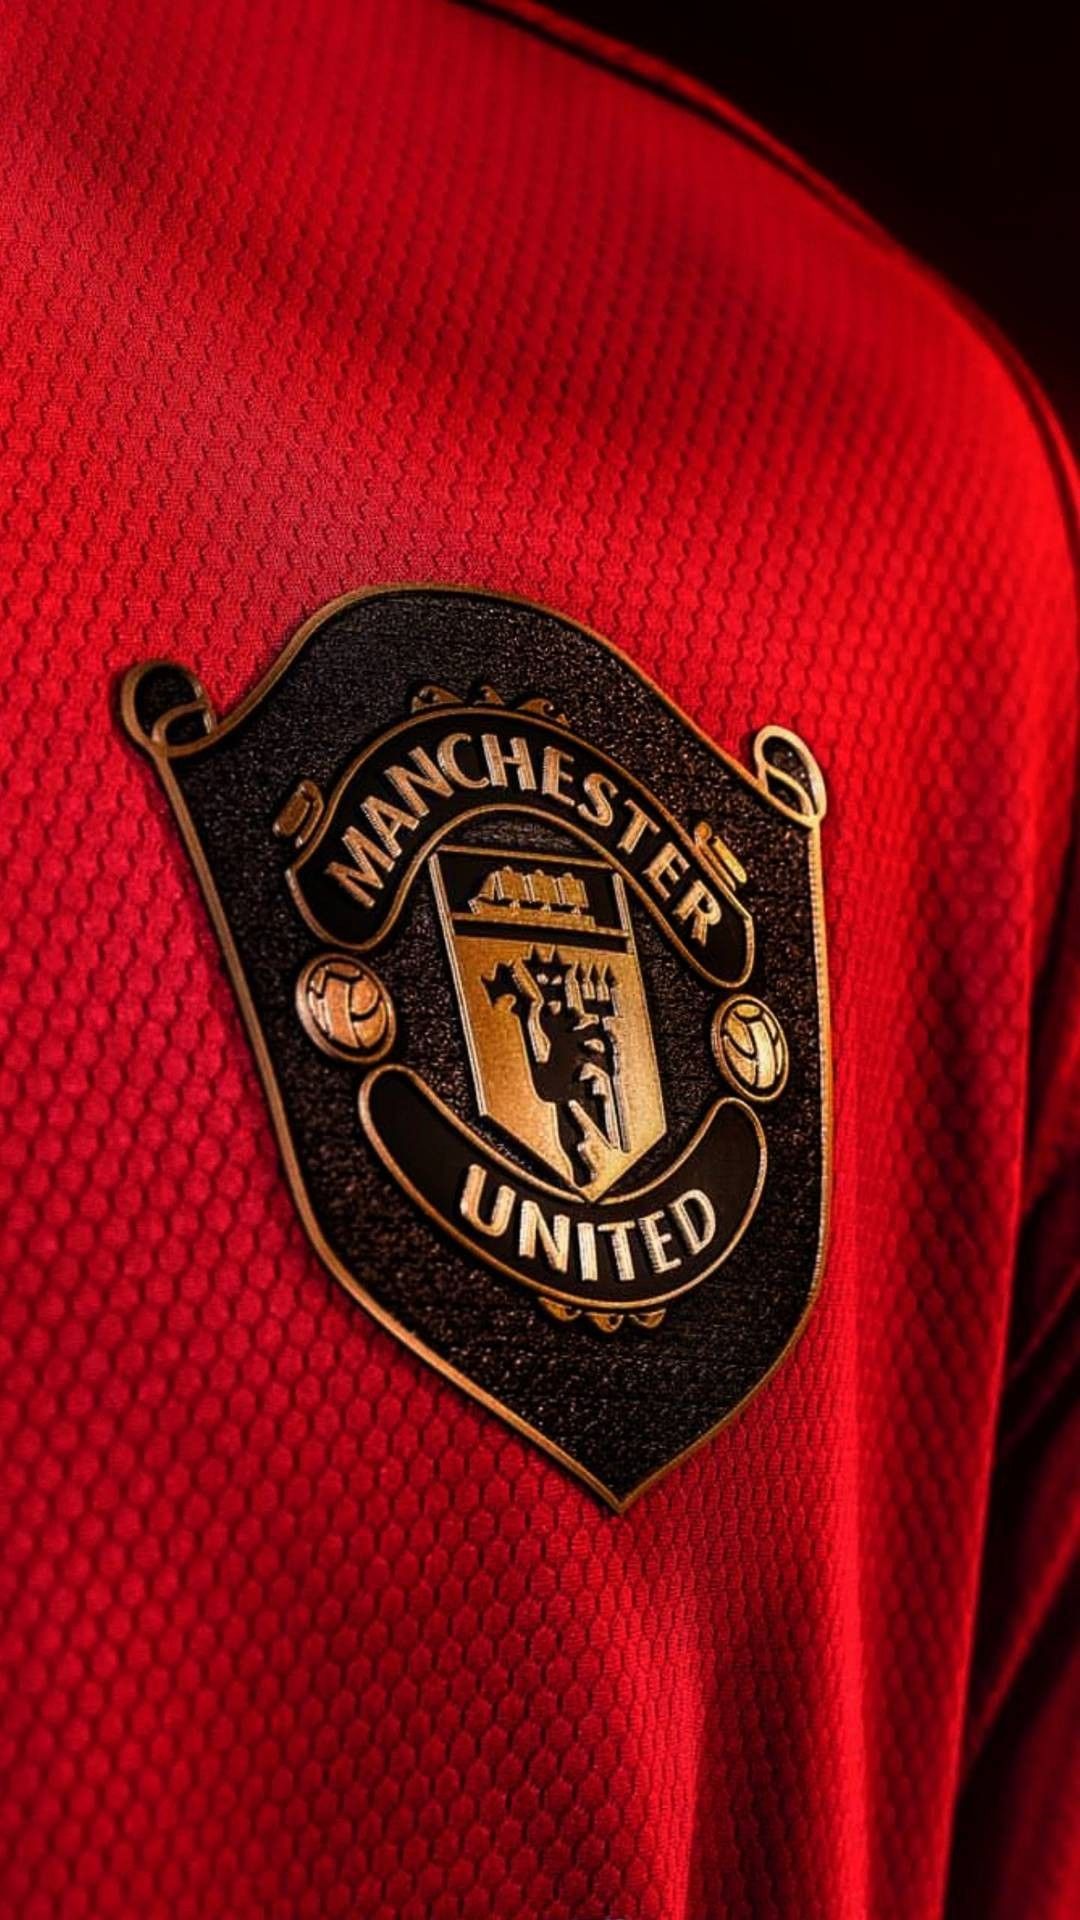 Manchester United 2020 Wallpaper Free Manchester United 2020 Background